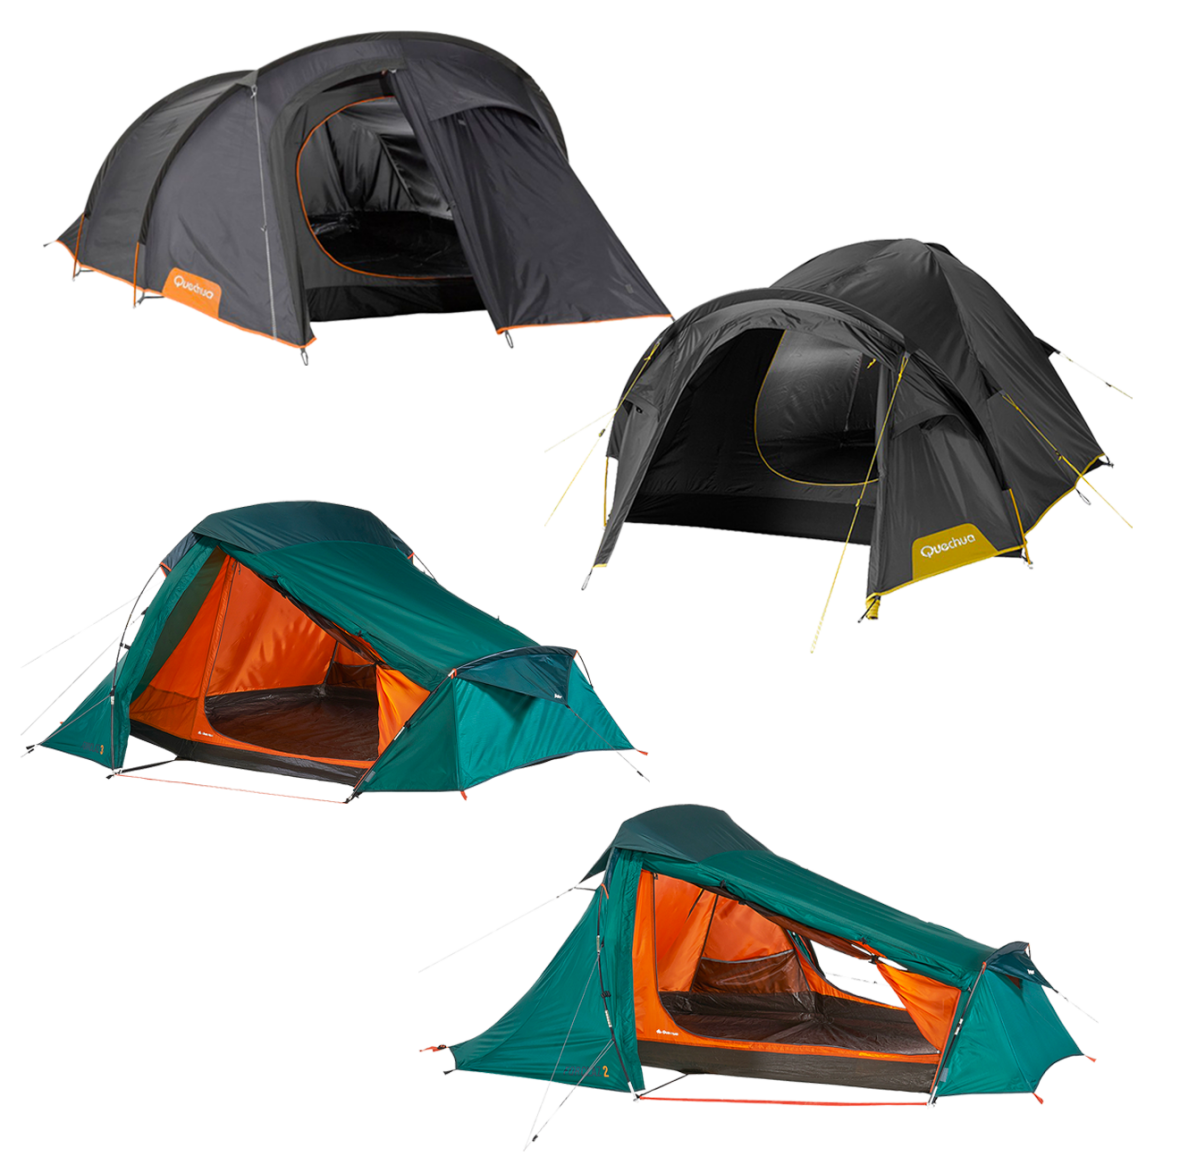 Looking after and repairing a trekking T2 and T3 ultralight tent and pole tent, 2, 3 persons 